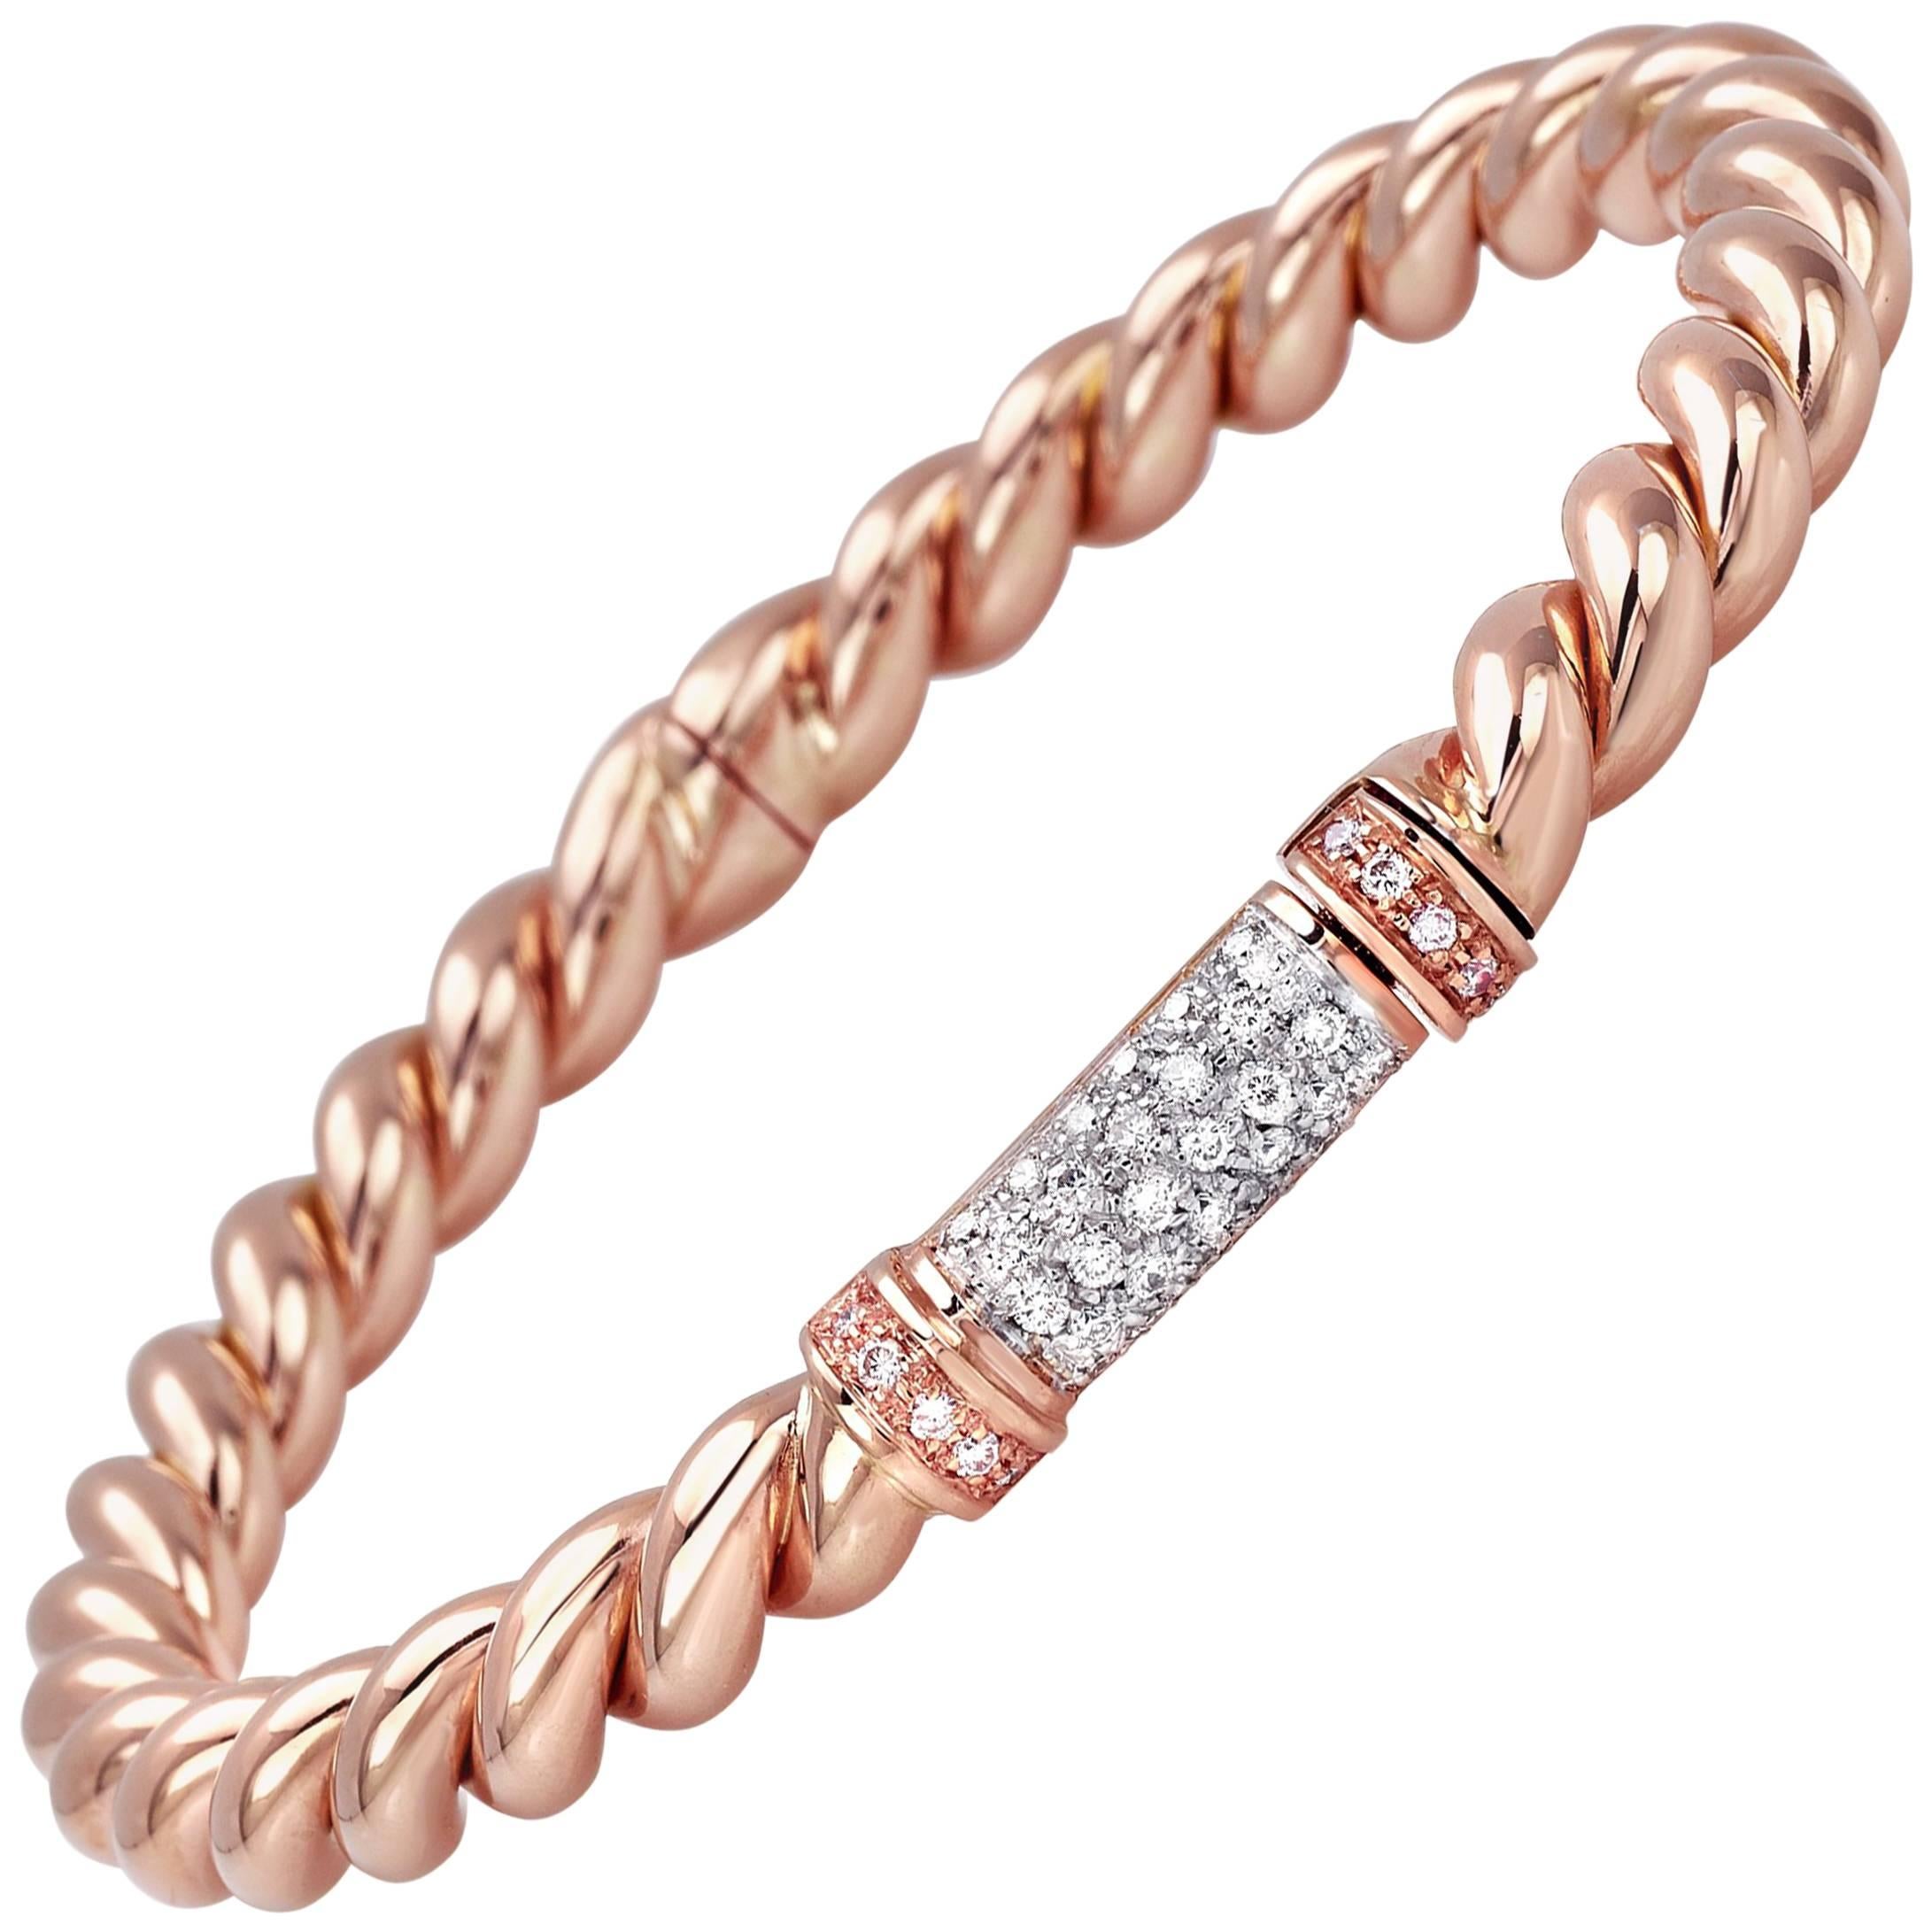 Bangle from the Collection "Rope" 18 Karat Rose Gold and Diamonds